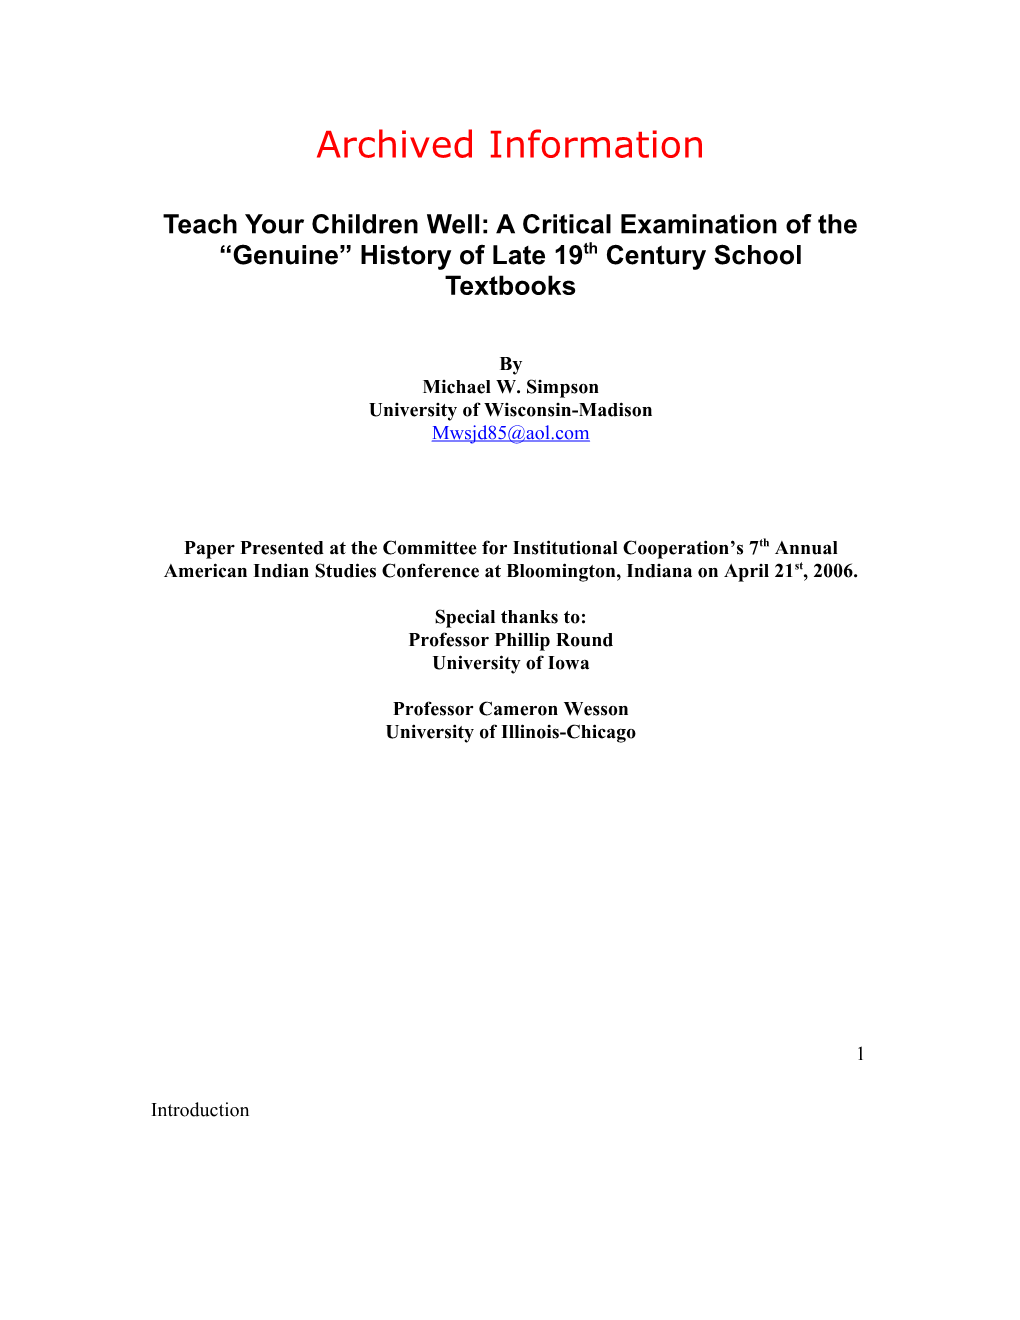 Archived: Teach Your Children Well: Genuine History of Late 19Th Century School Textbooks